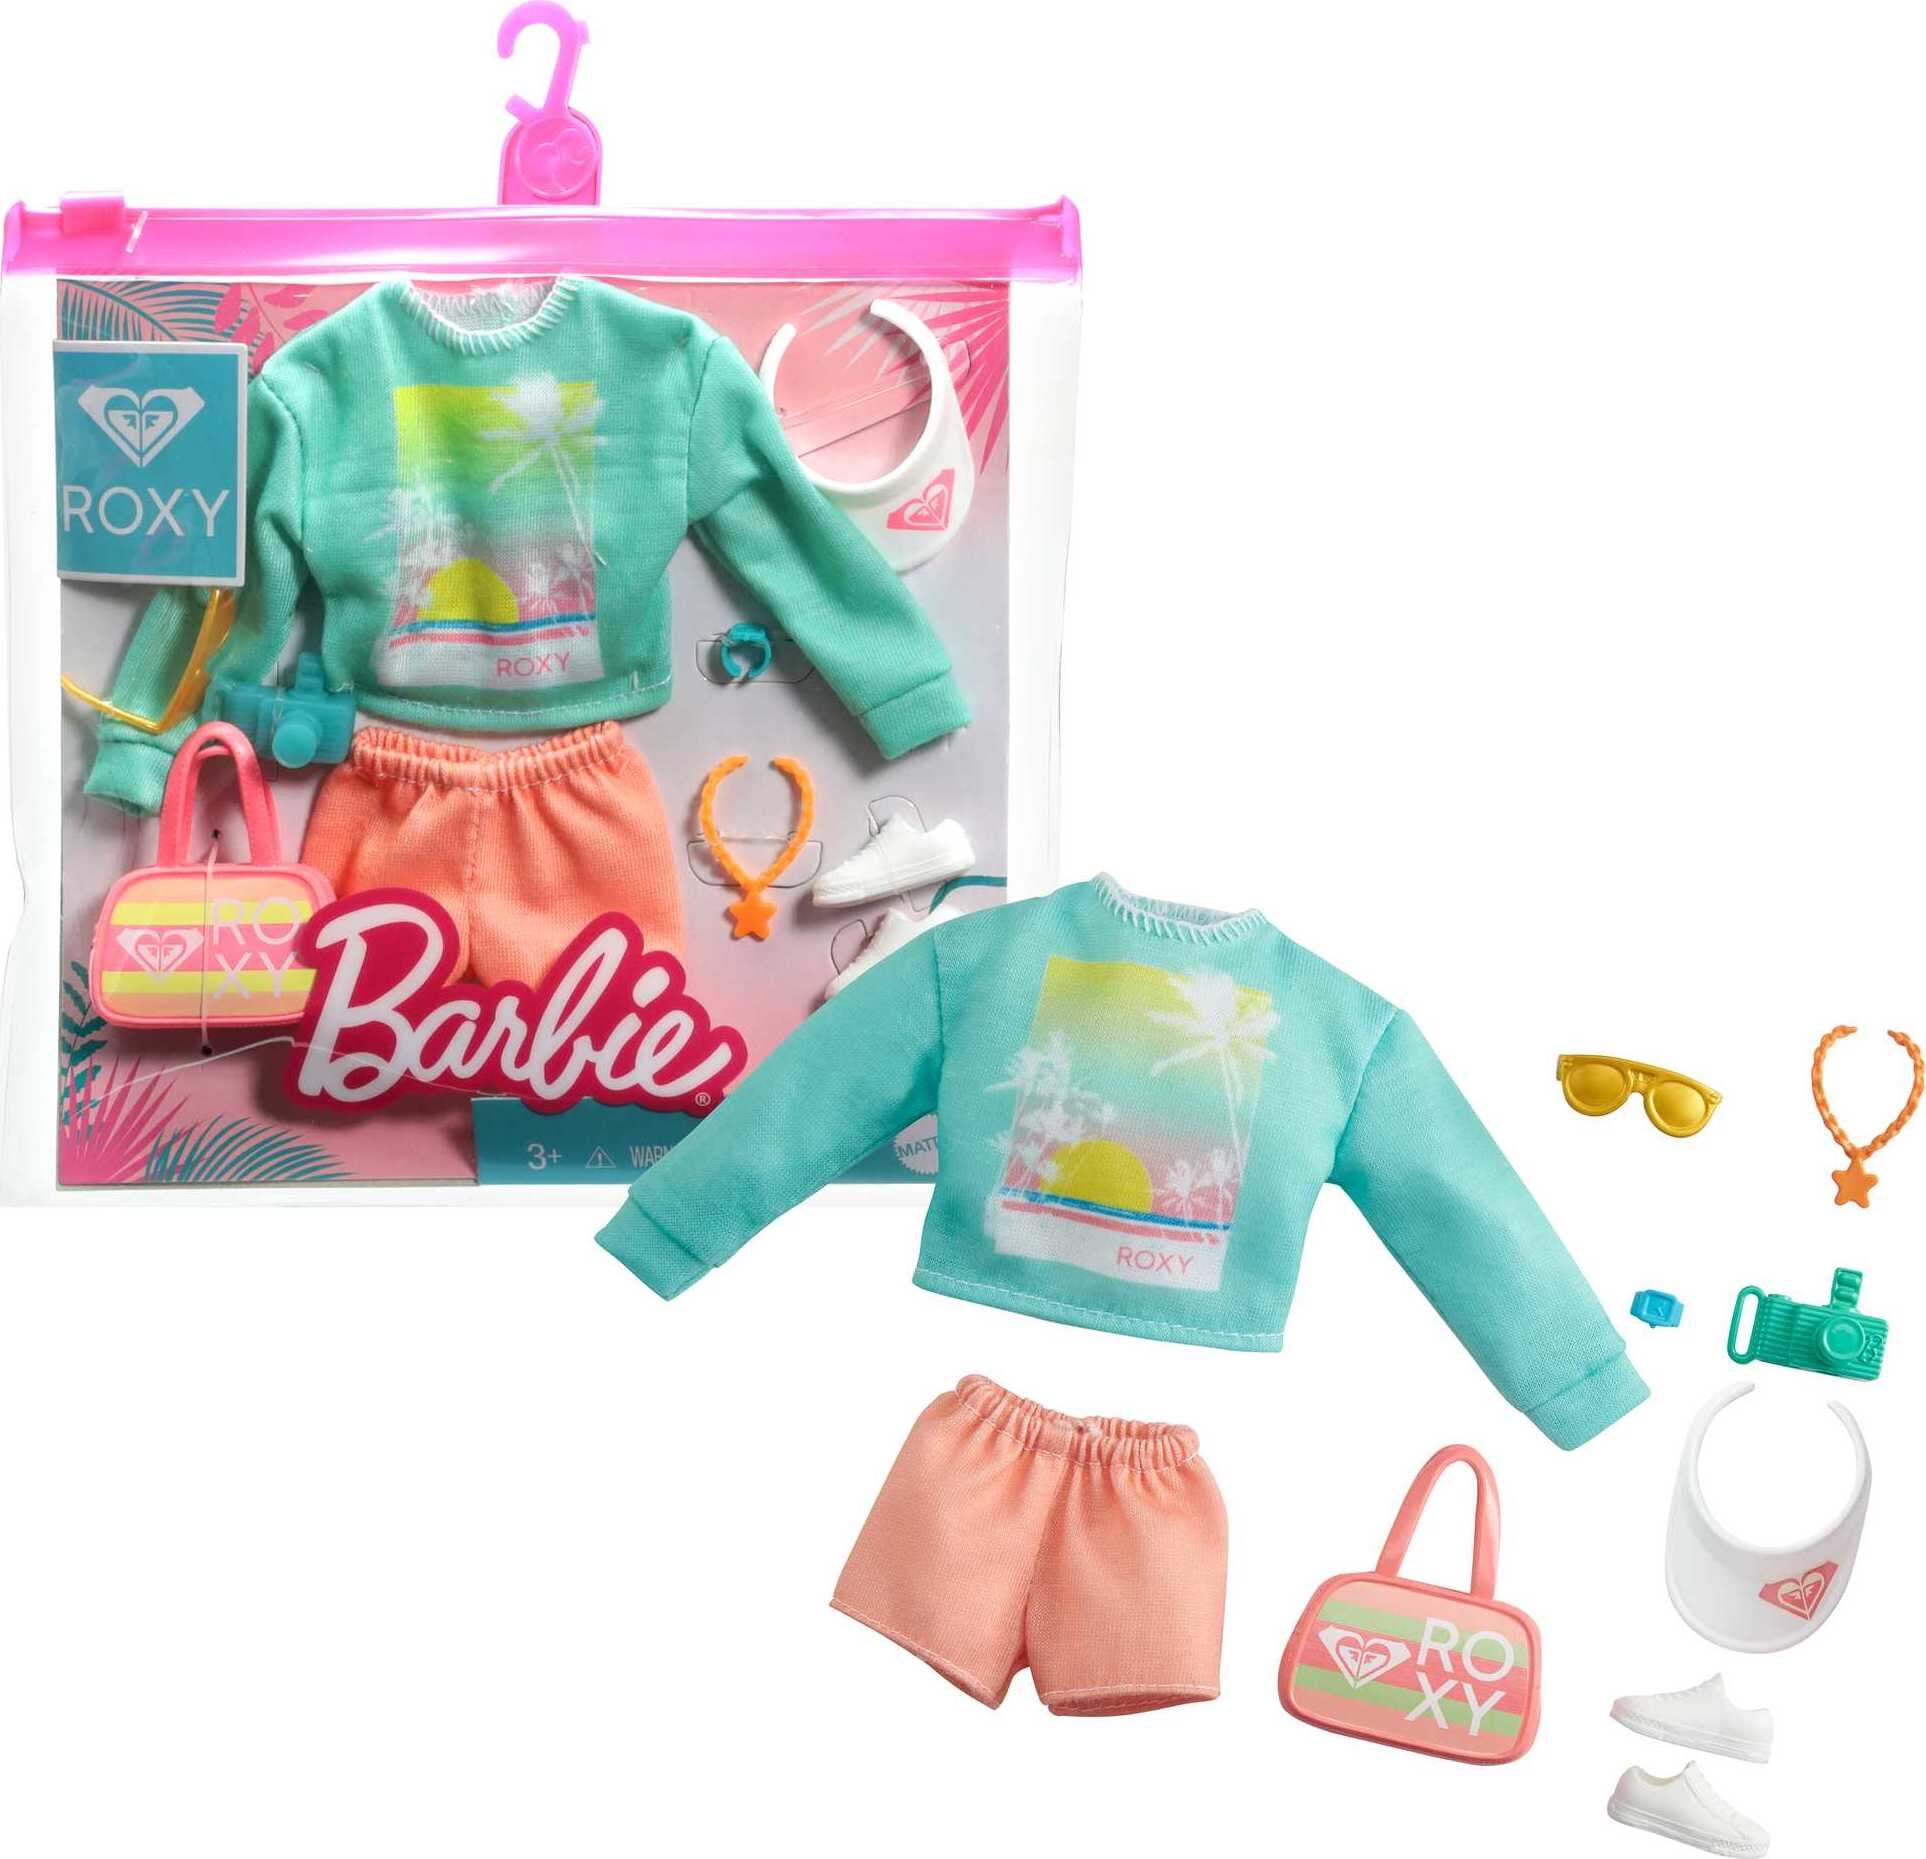 ROXY Barbie Storytelling Fashion Pack Barbie Clothes NEW